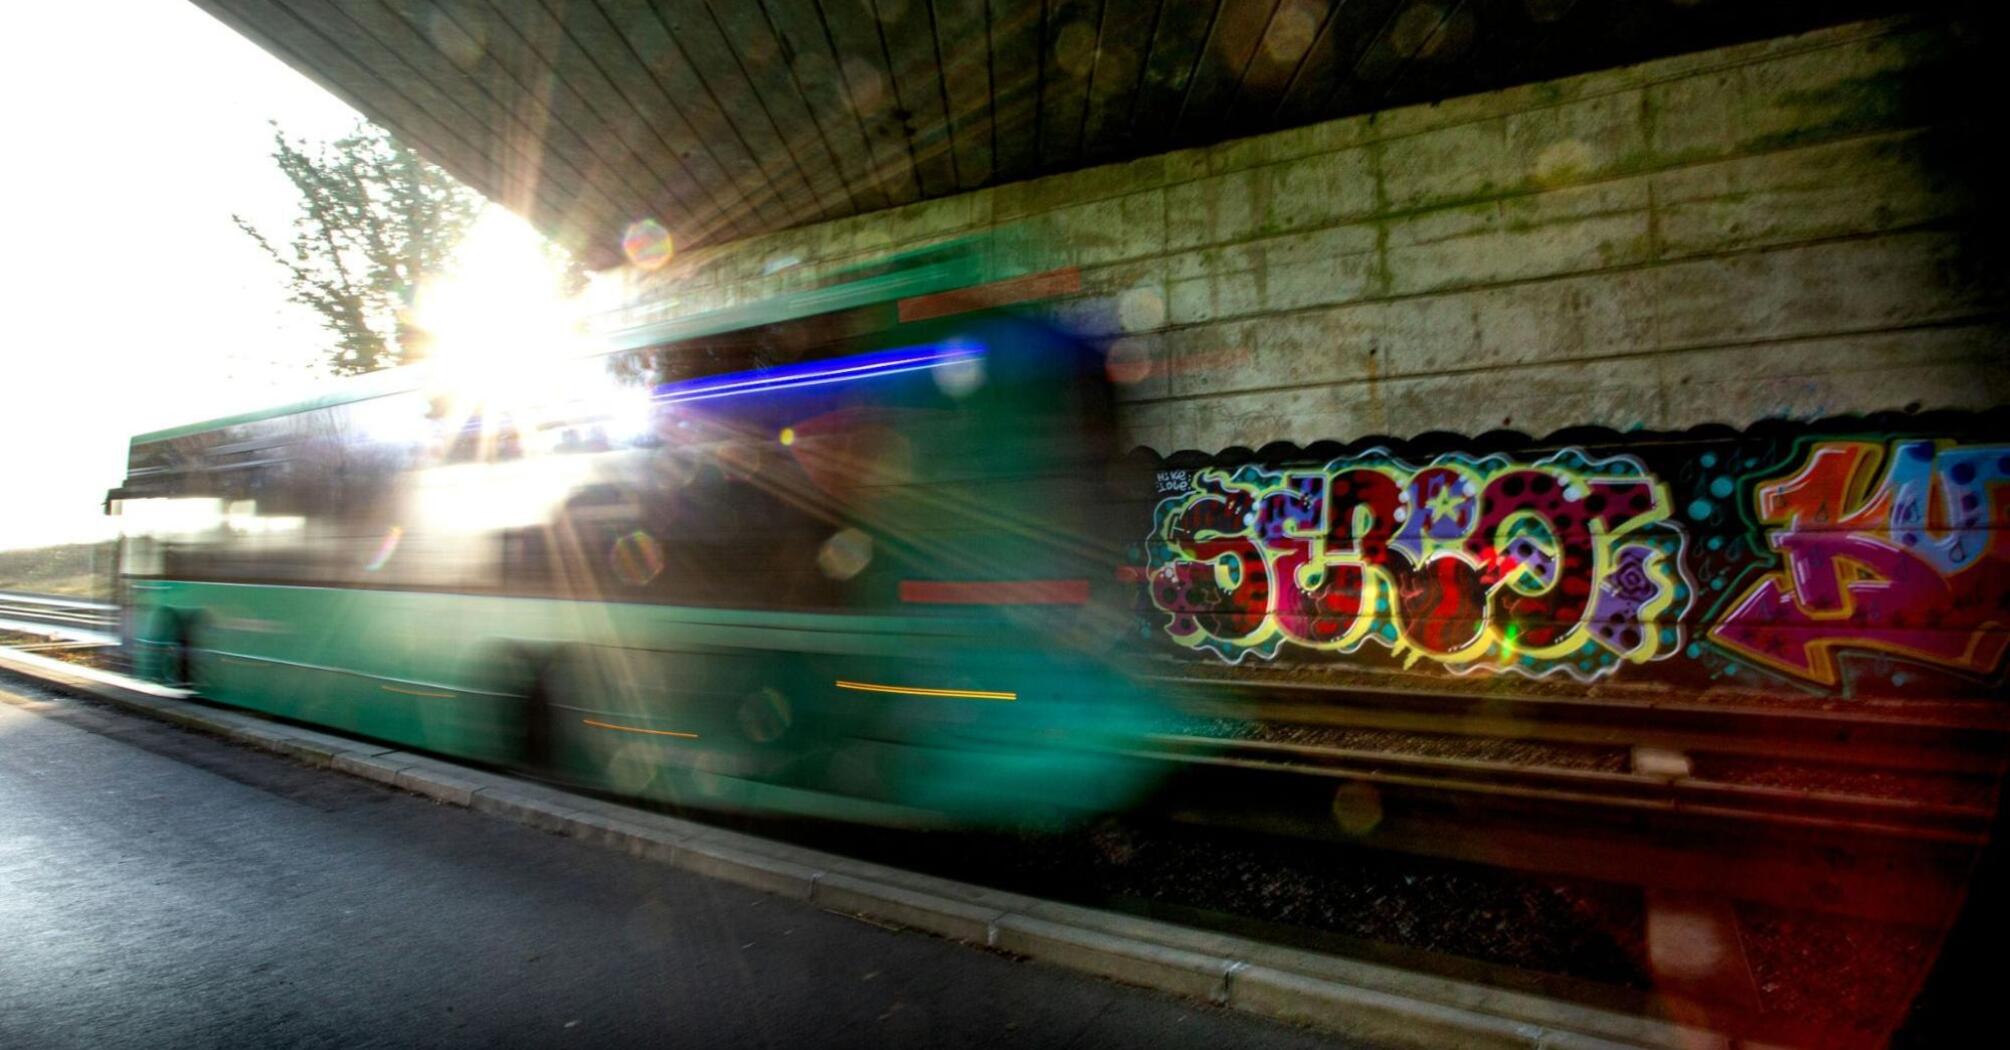 A green Stagecoach bus passing under a bridge with graffiti on the wall, sunlight flaring in the background